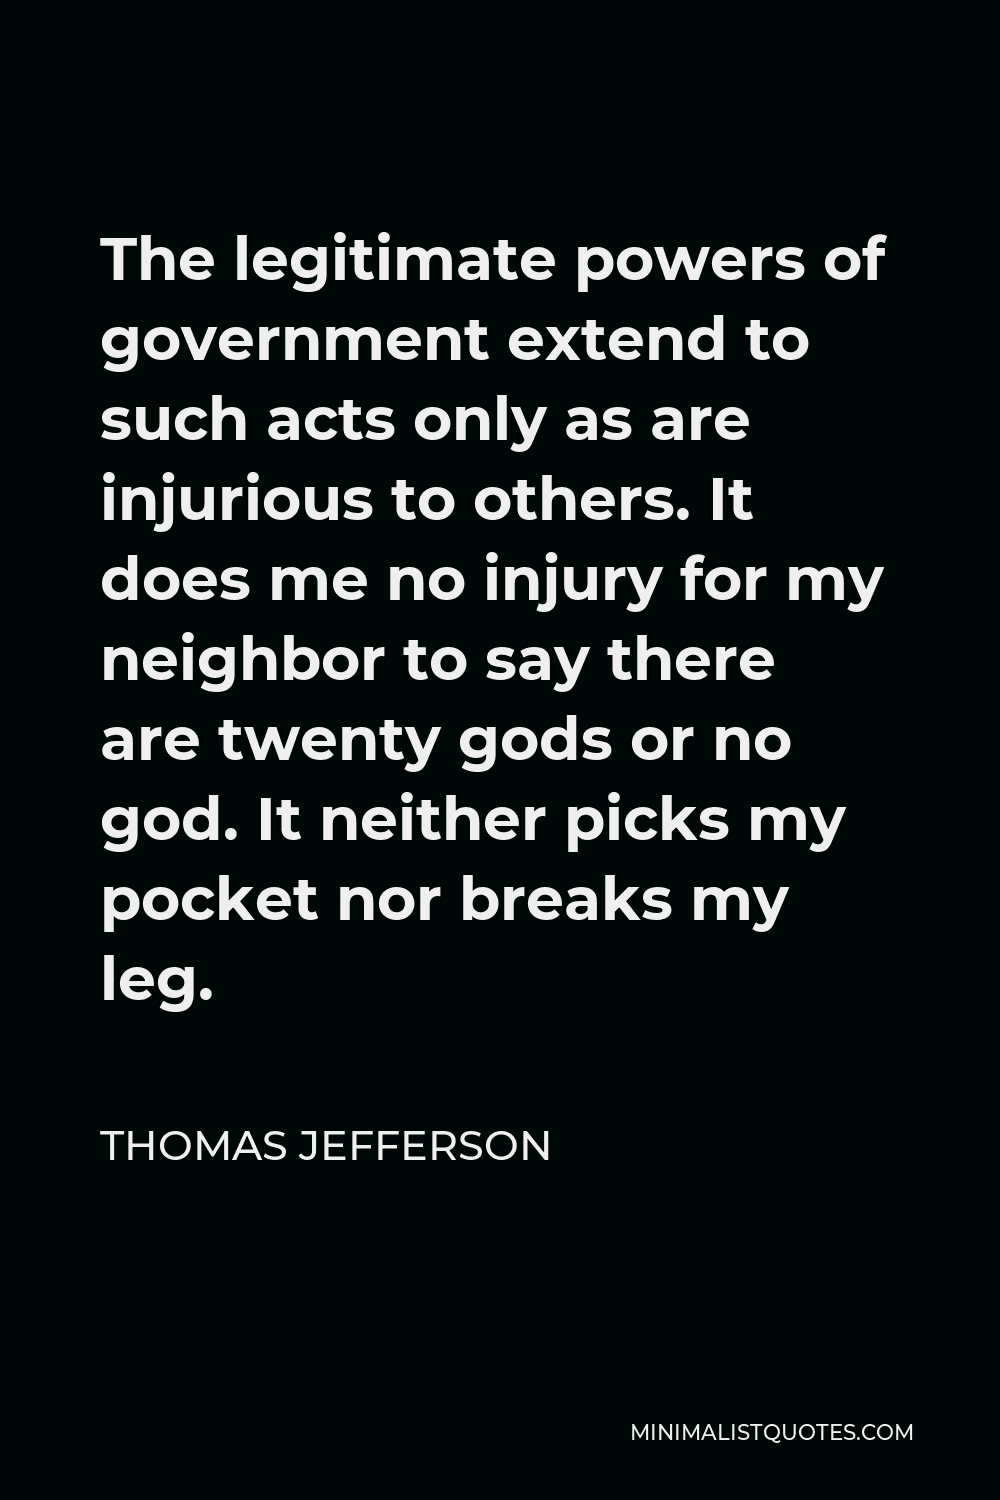 Thomas Jefferson Quote - The legitimate powers of government extend to such acts only as are injurious to others. It does me no injury for my neighbor to say there are twenty gods or no god. It neither picks my pocket nor breaks my leg.